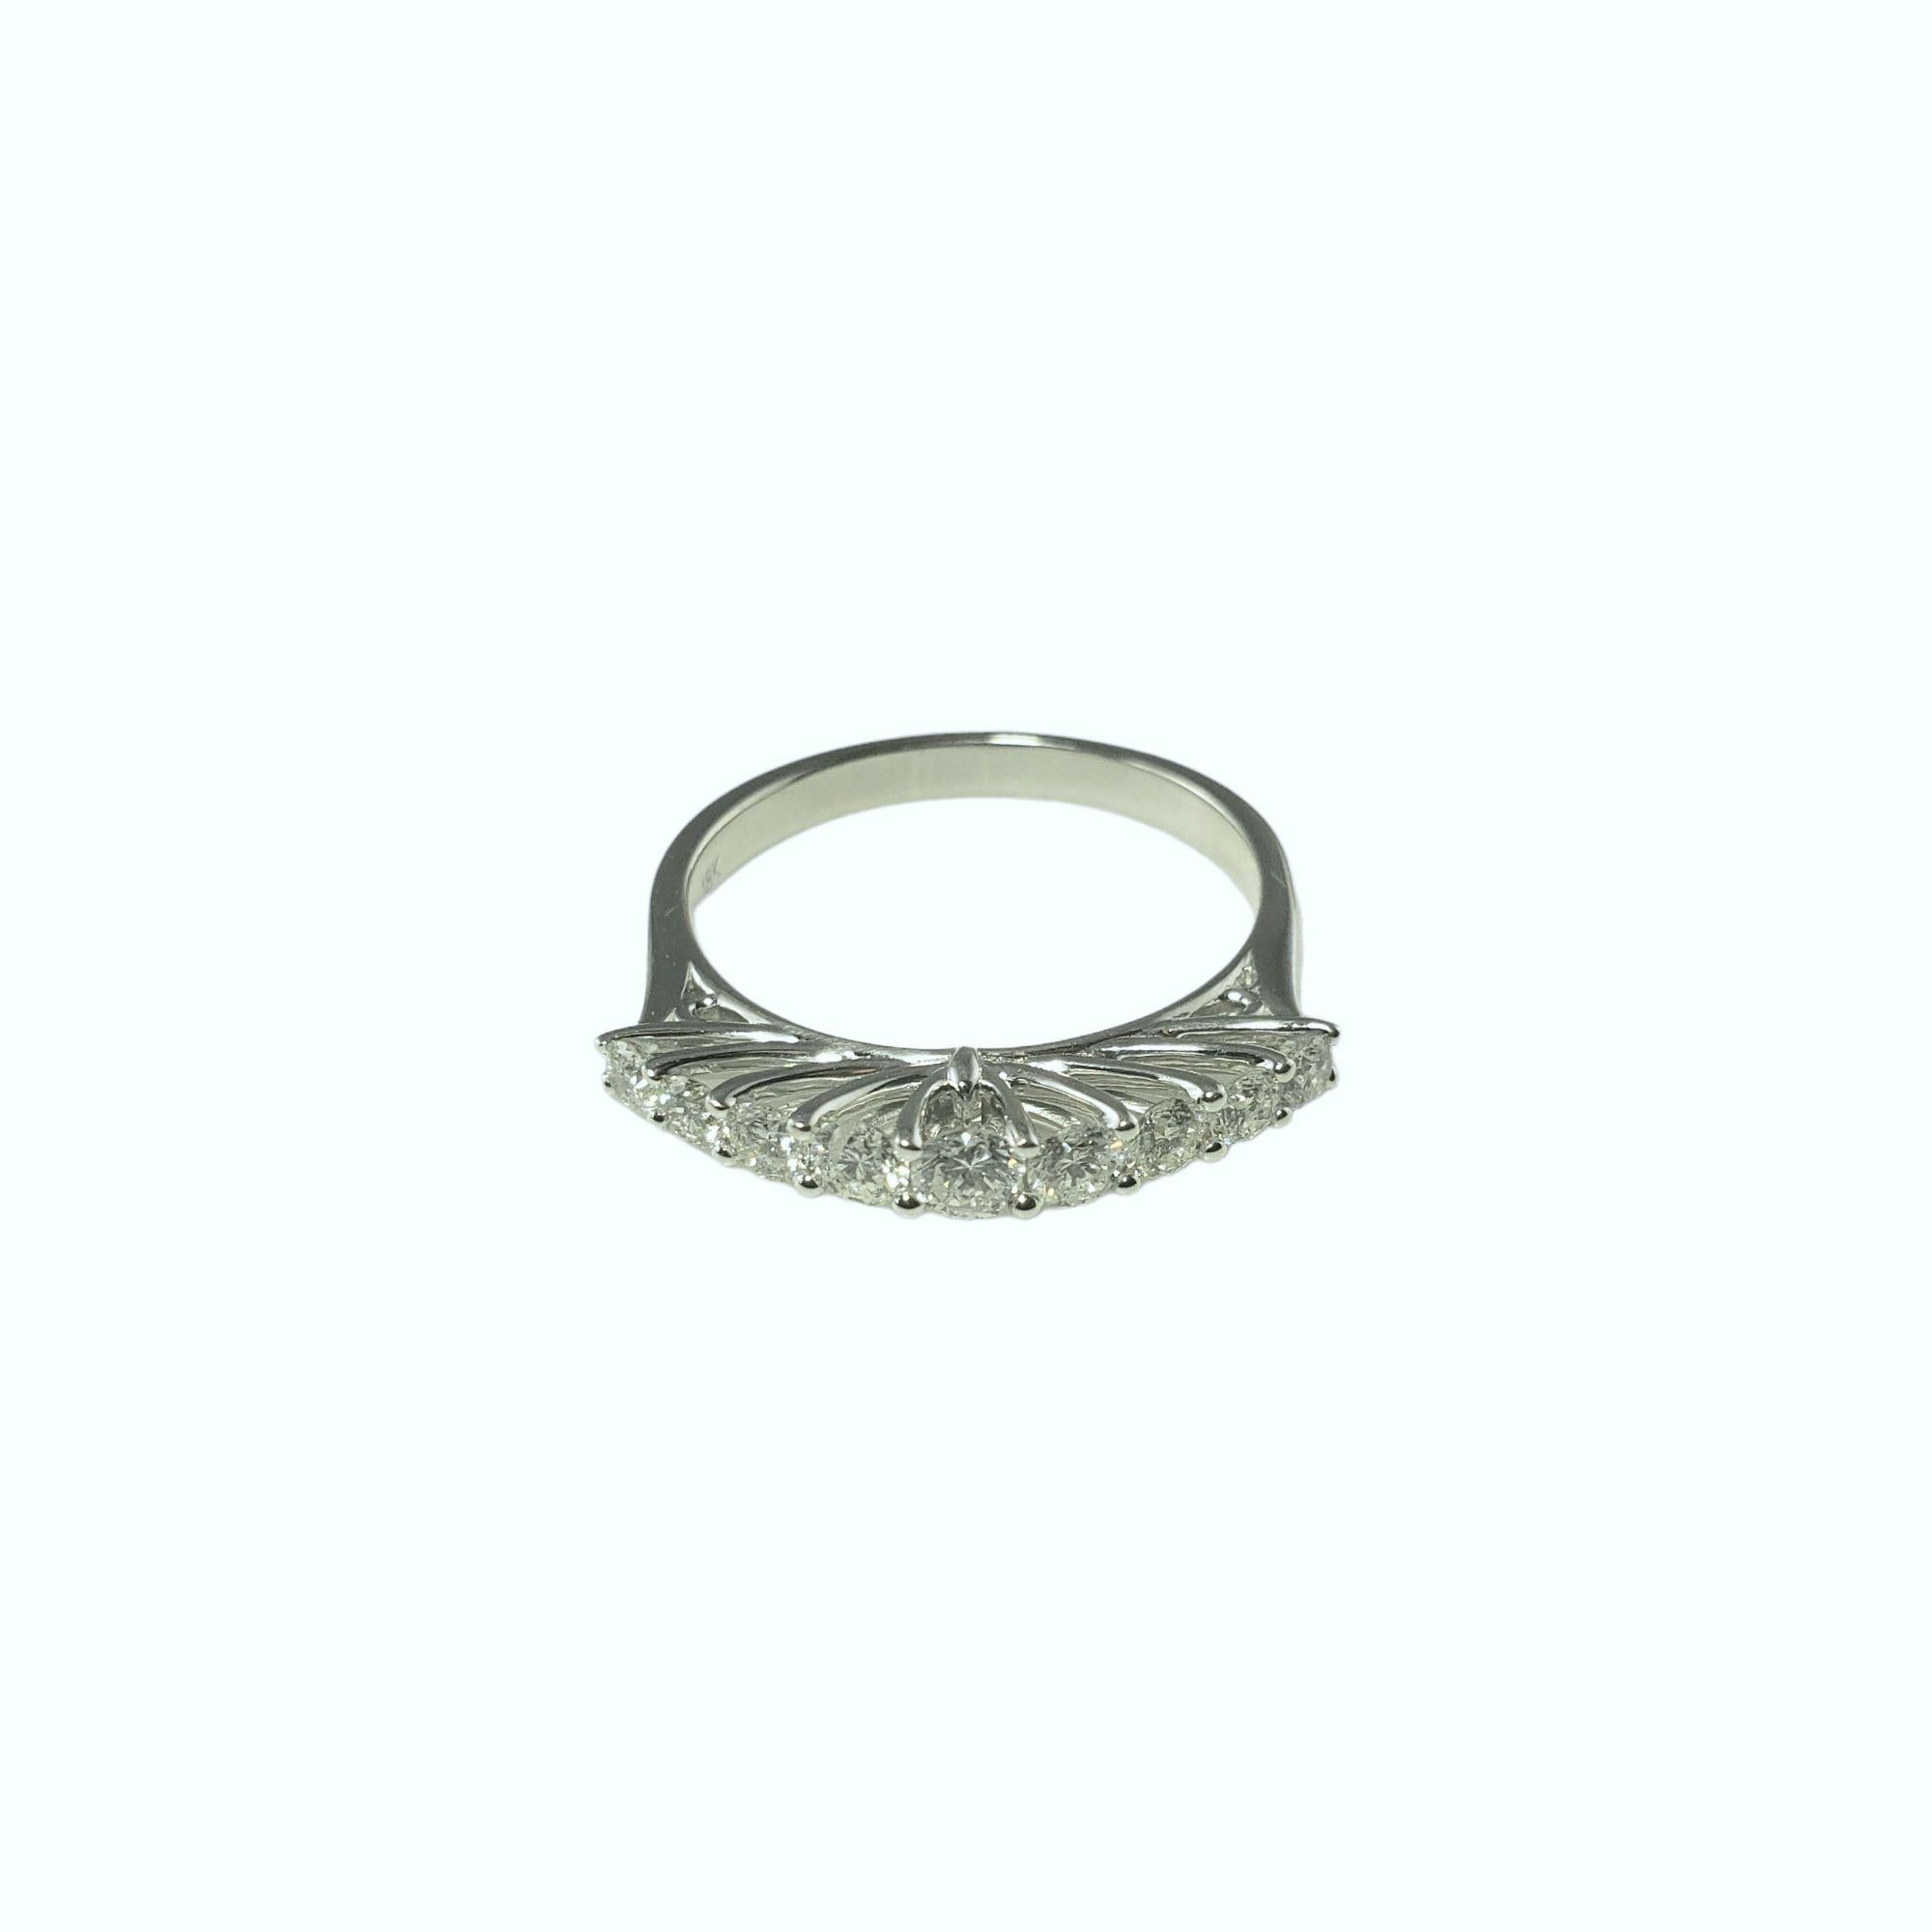 This sparkling ring features nine round brilliant cut diamonds* set in classic 18K white gold.  Width: 3 mm.  Shank: 2 mm.

*Slight chip to middle stone noted not visible to naked eye.

Approximate diamond weight: .54 ct.

Diamond color: